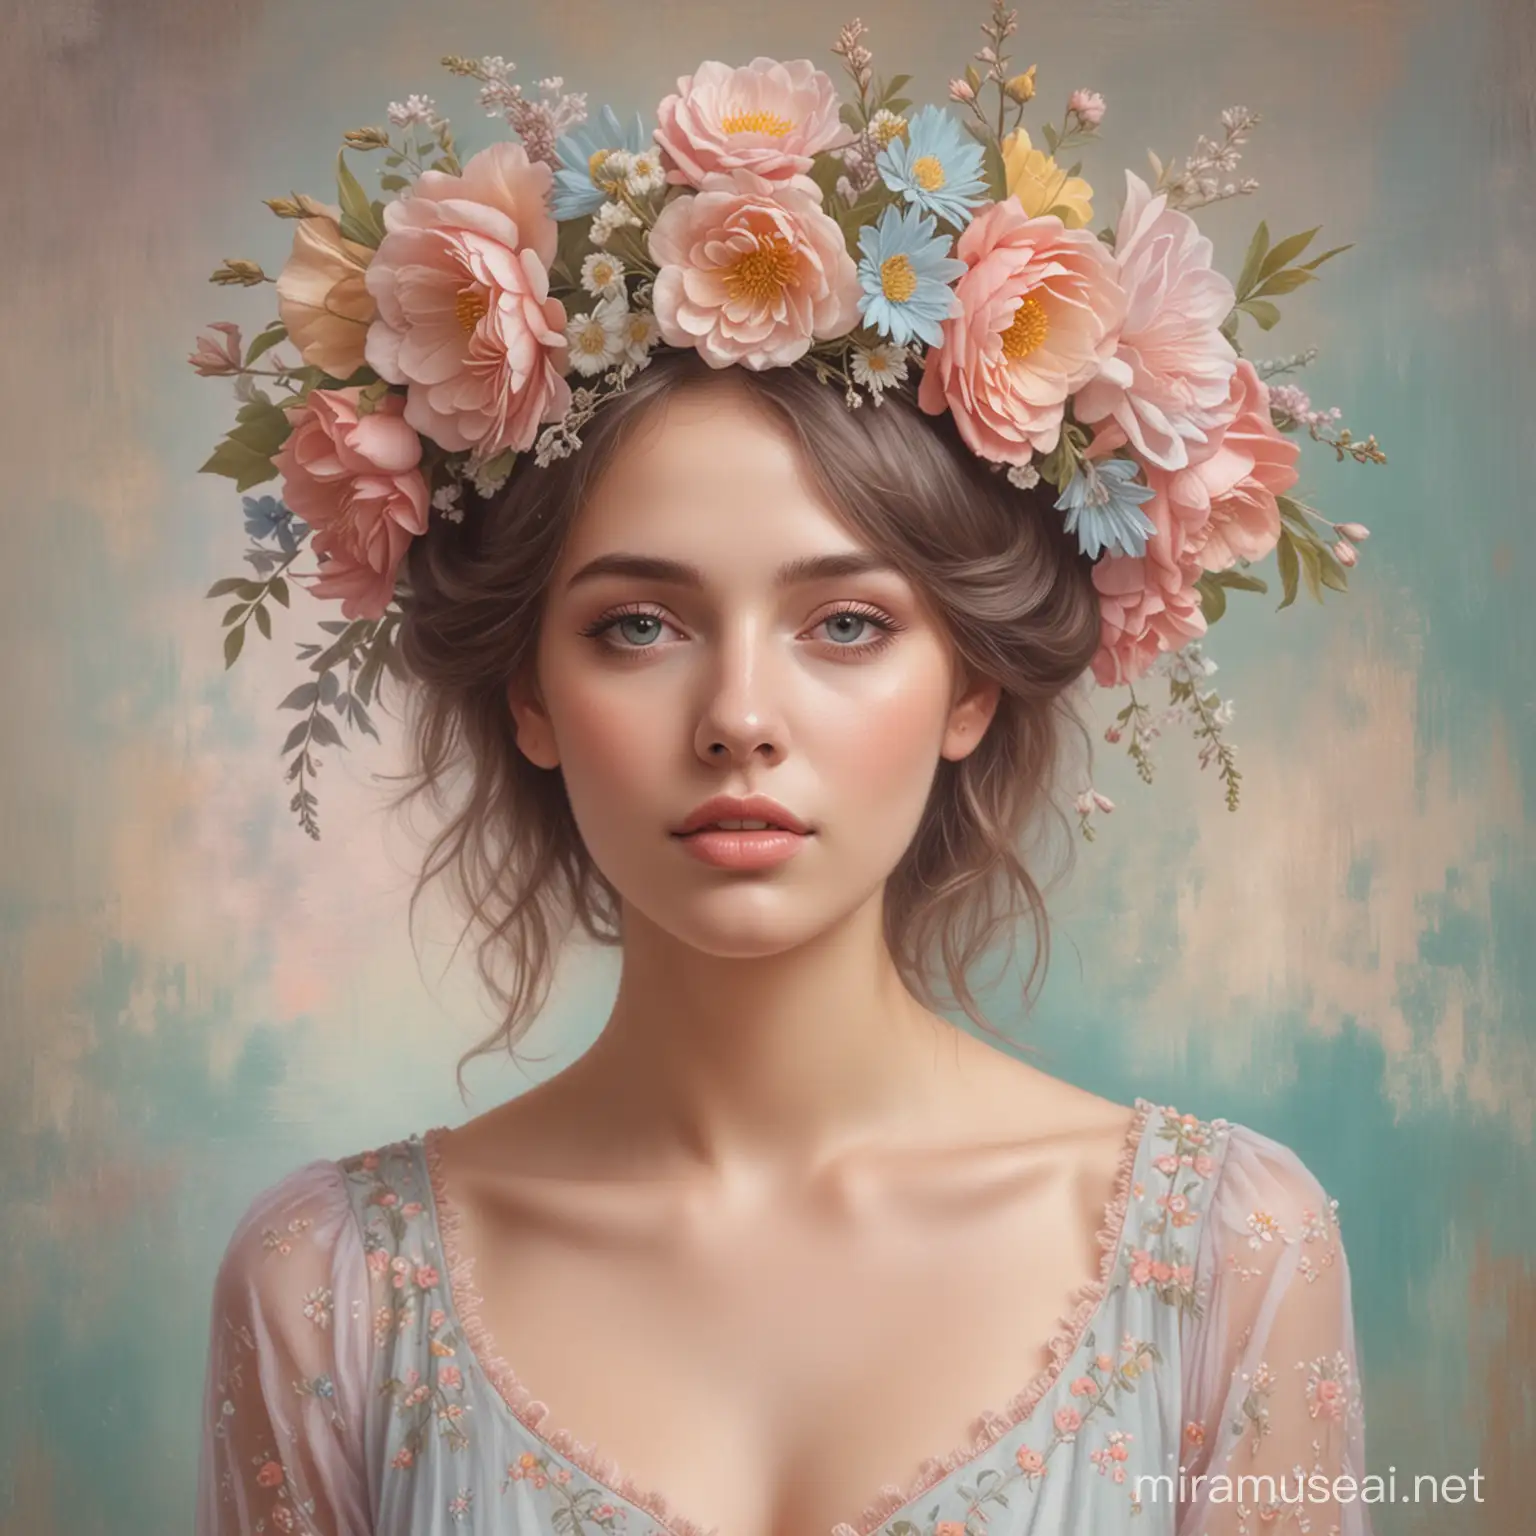 Dreamy pastel drawing a woman flowers on her head and the flowers contineus her dress and the background